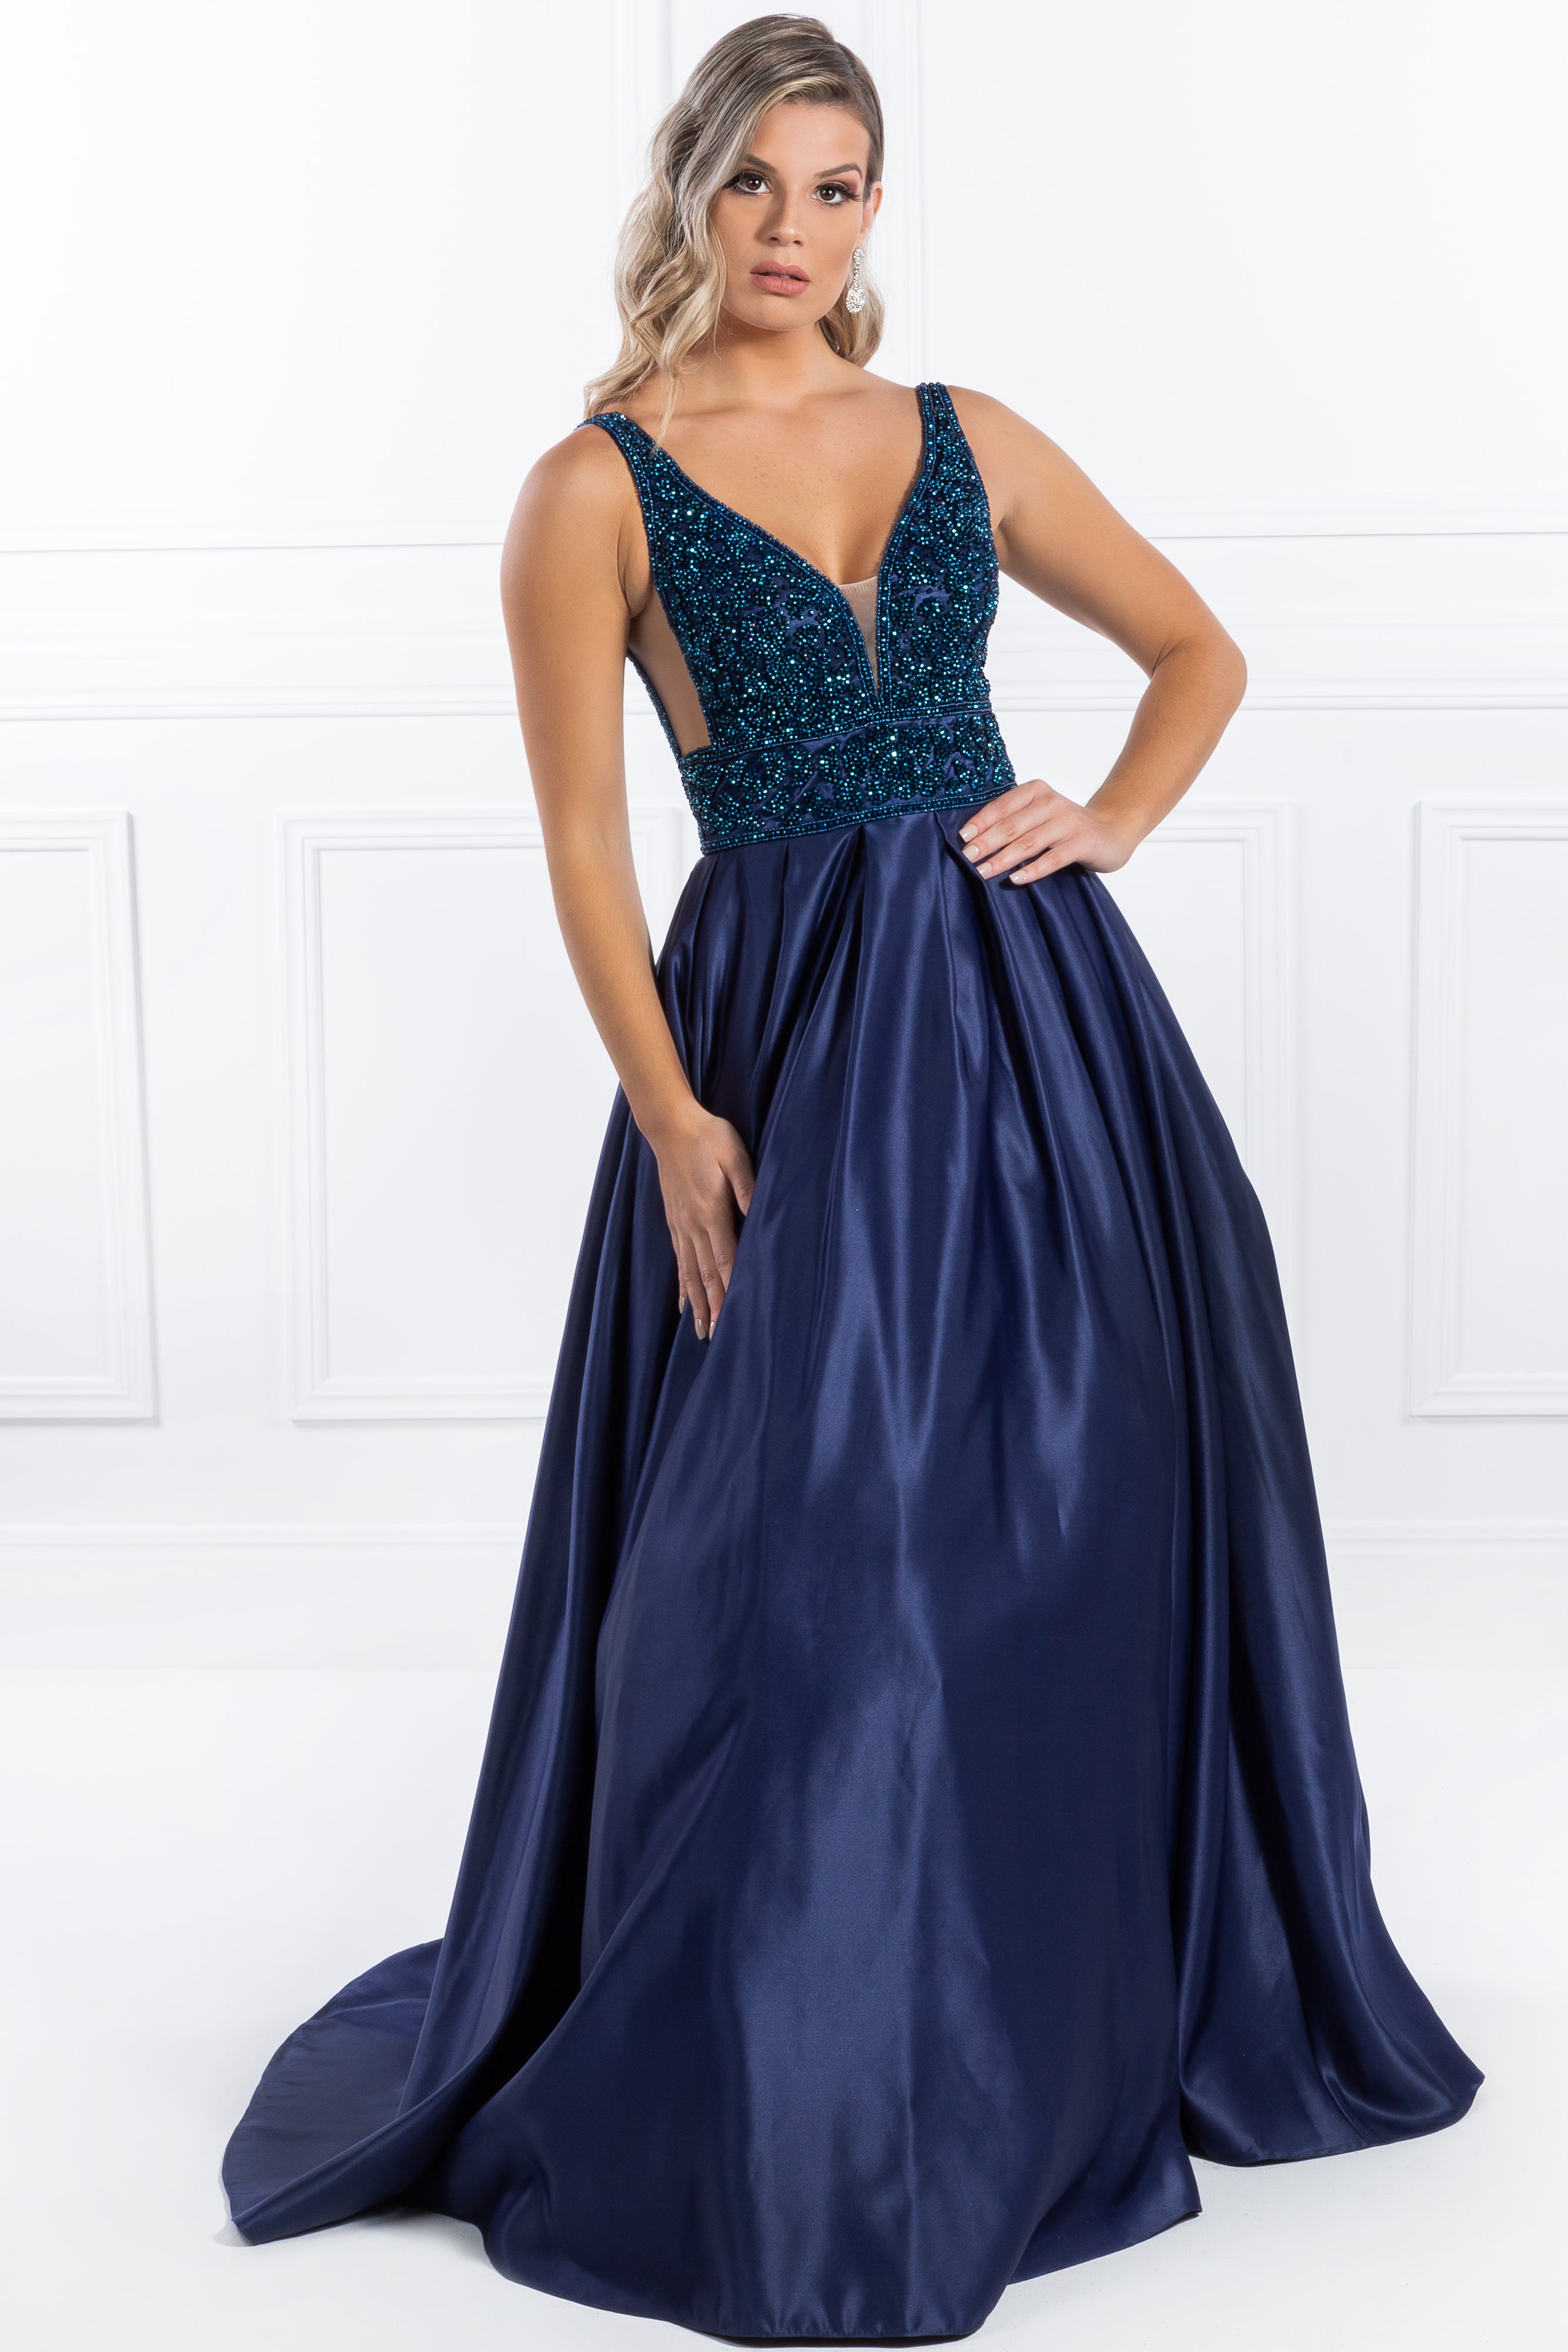 Honey Couture EMELY Royal Blue Beaded Ball Gown Formal Dress